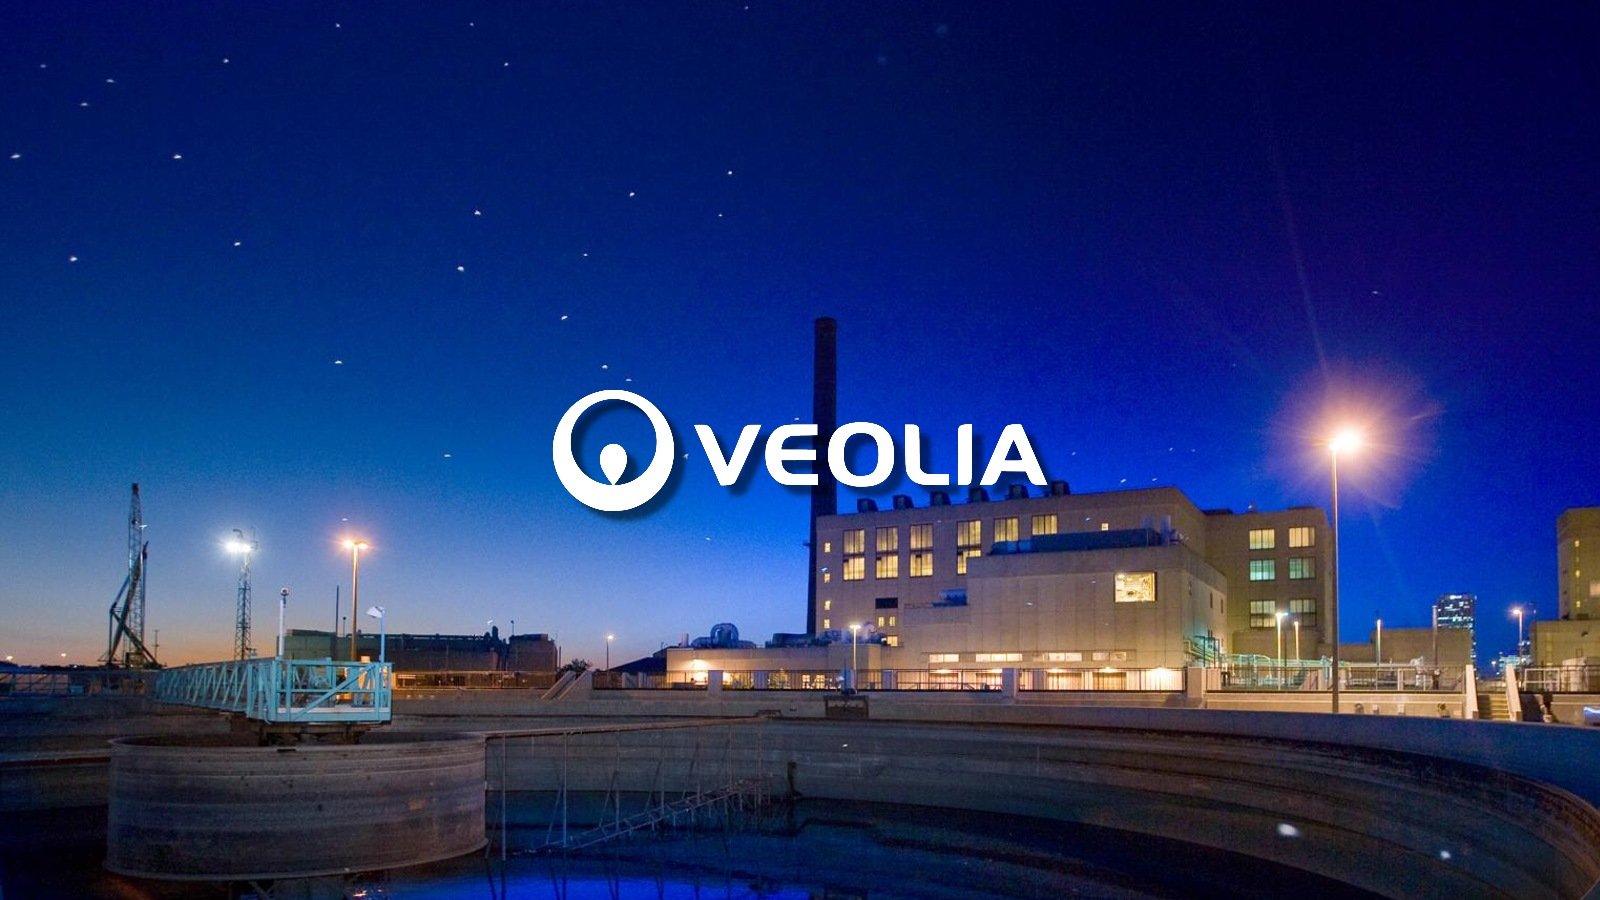 Water services giant Veolia North America hit by ransomware attack